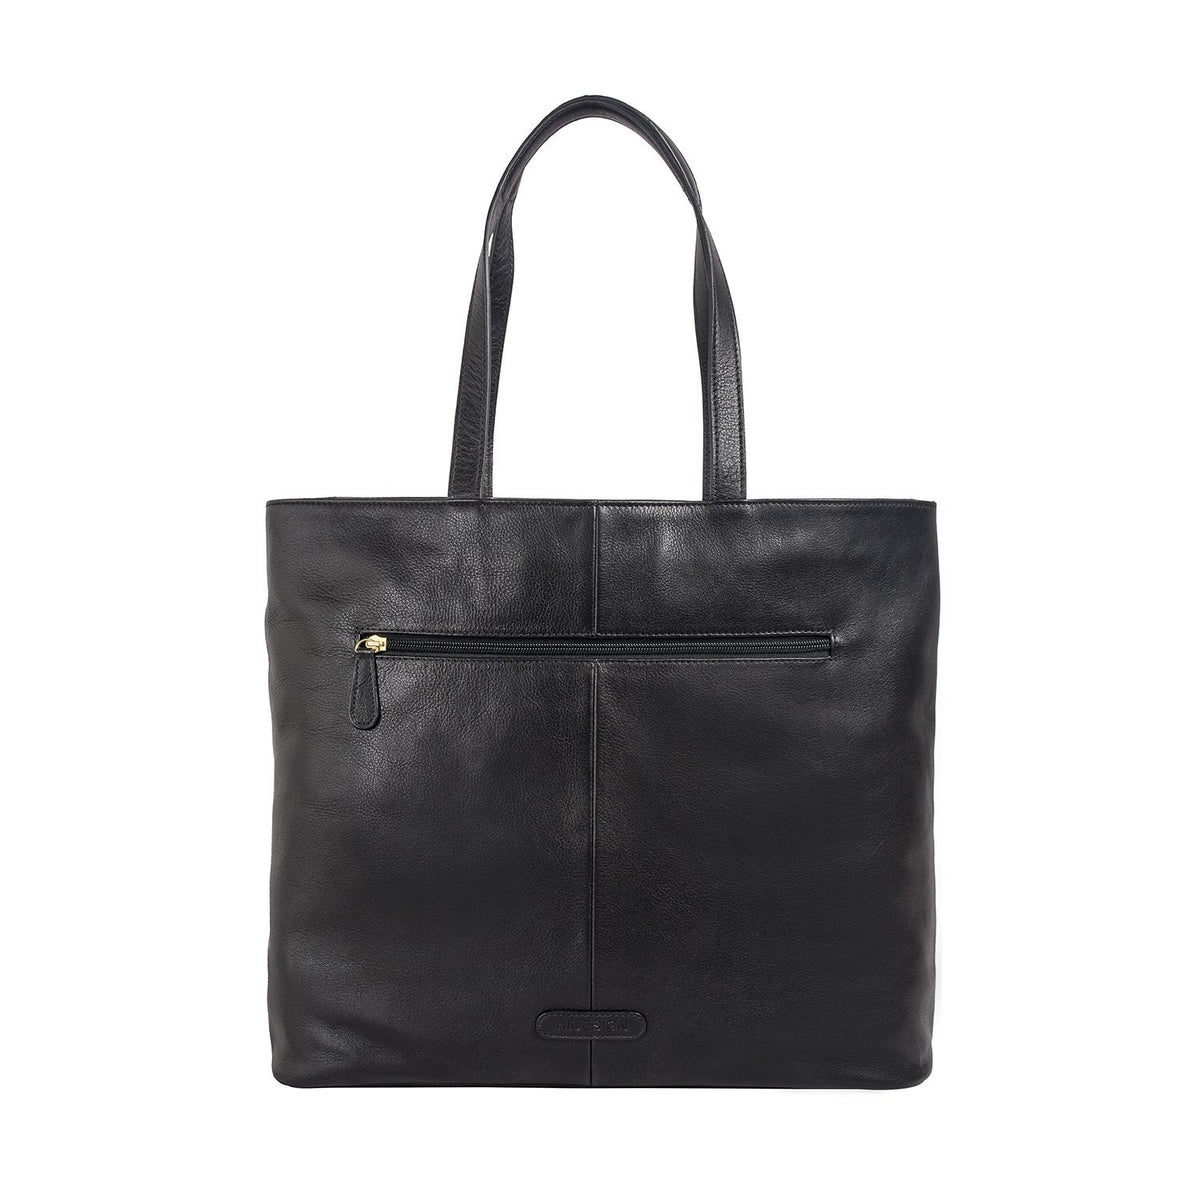 Bags & Luggage - Women's Bags - Shoulder Bags Clara Large Leather Tote